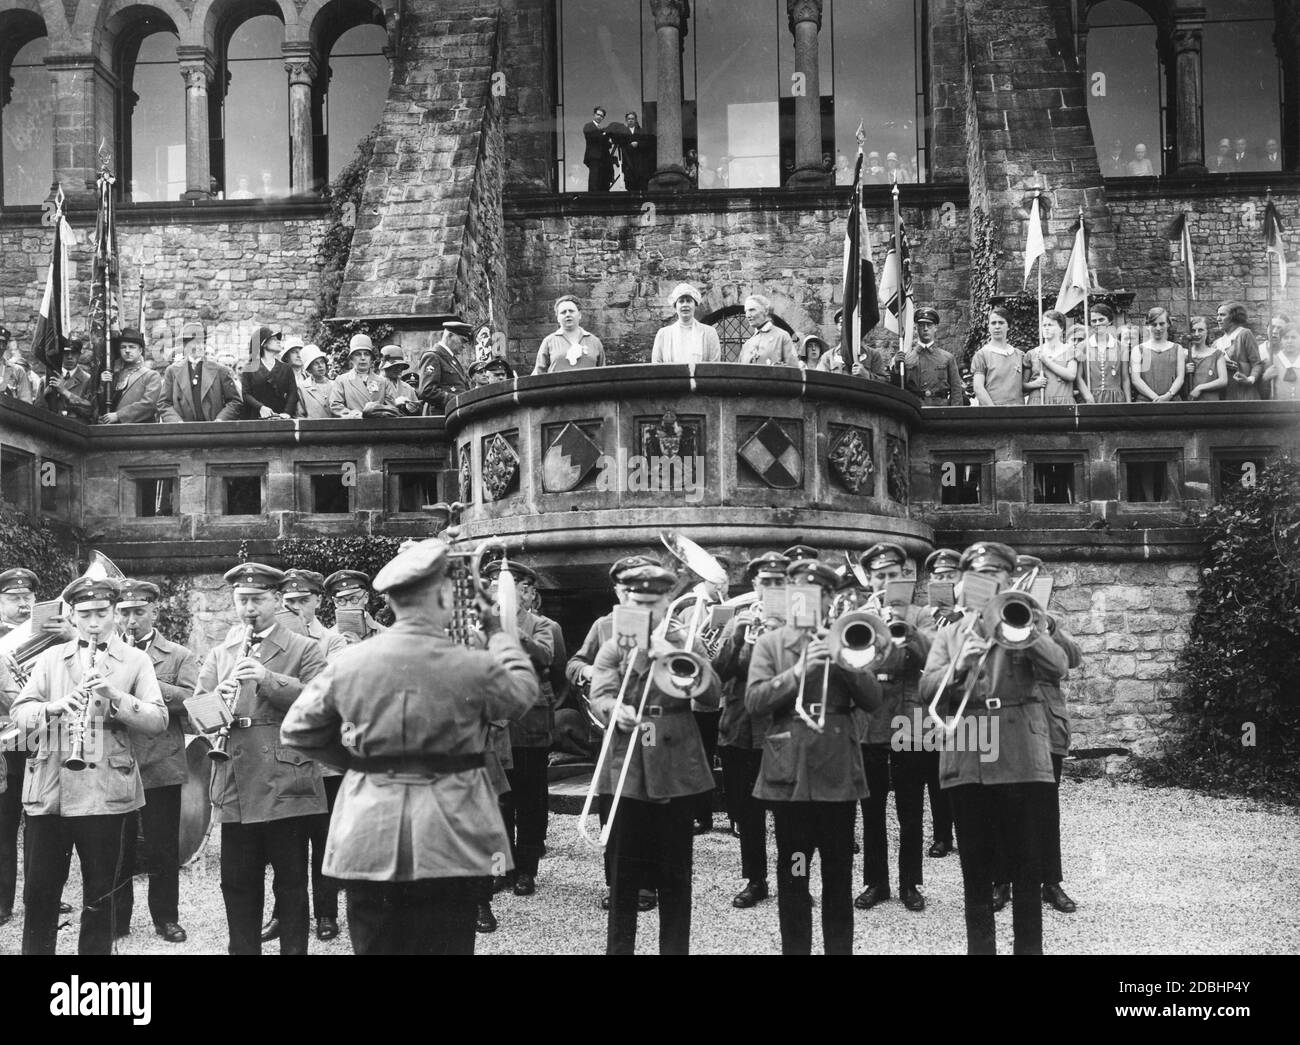 Crown Princess Cecilie (centre, with hat) at an event organised by the Bund Koenigin Luise (Queen Louise League). She is standing on a balcony in front of the entrance to the Imperial Palace in Goslar, in front of her there is a brass band playing. Cecilie was the patron of the conservative-monarchist women's organisation. Stock Photo